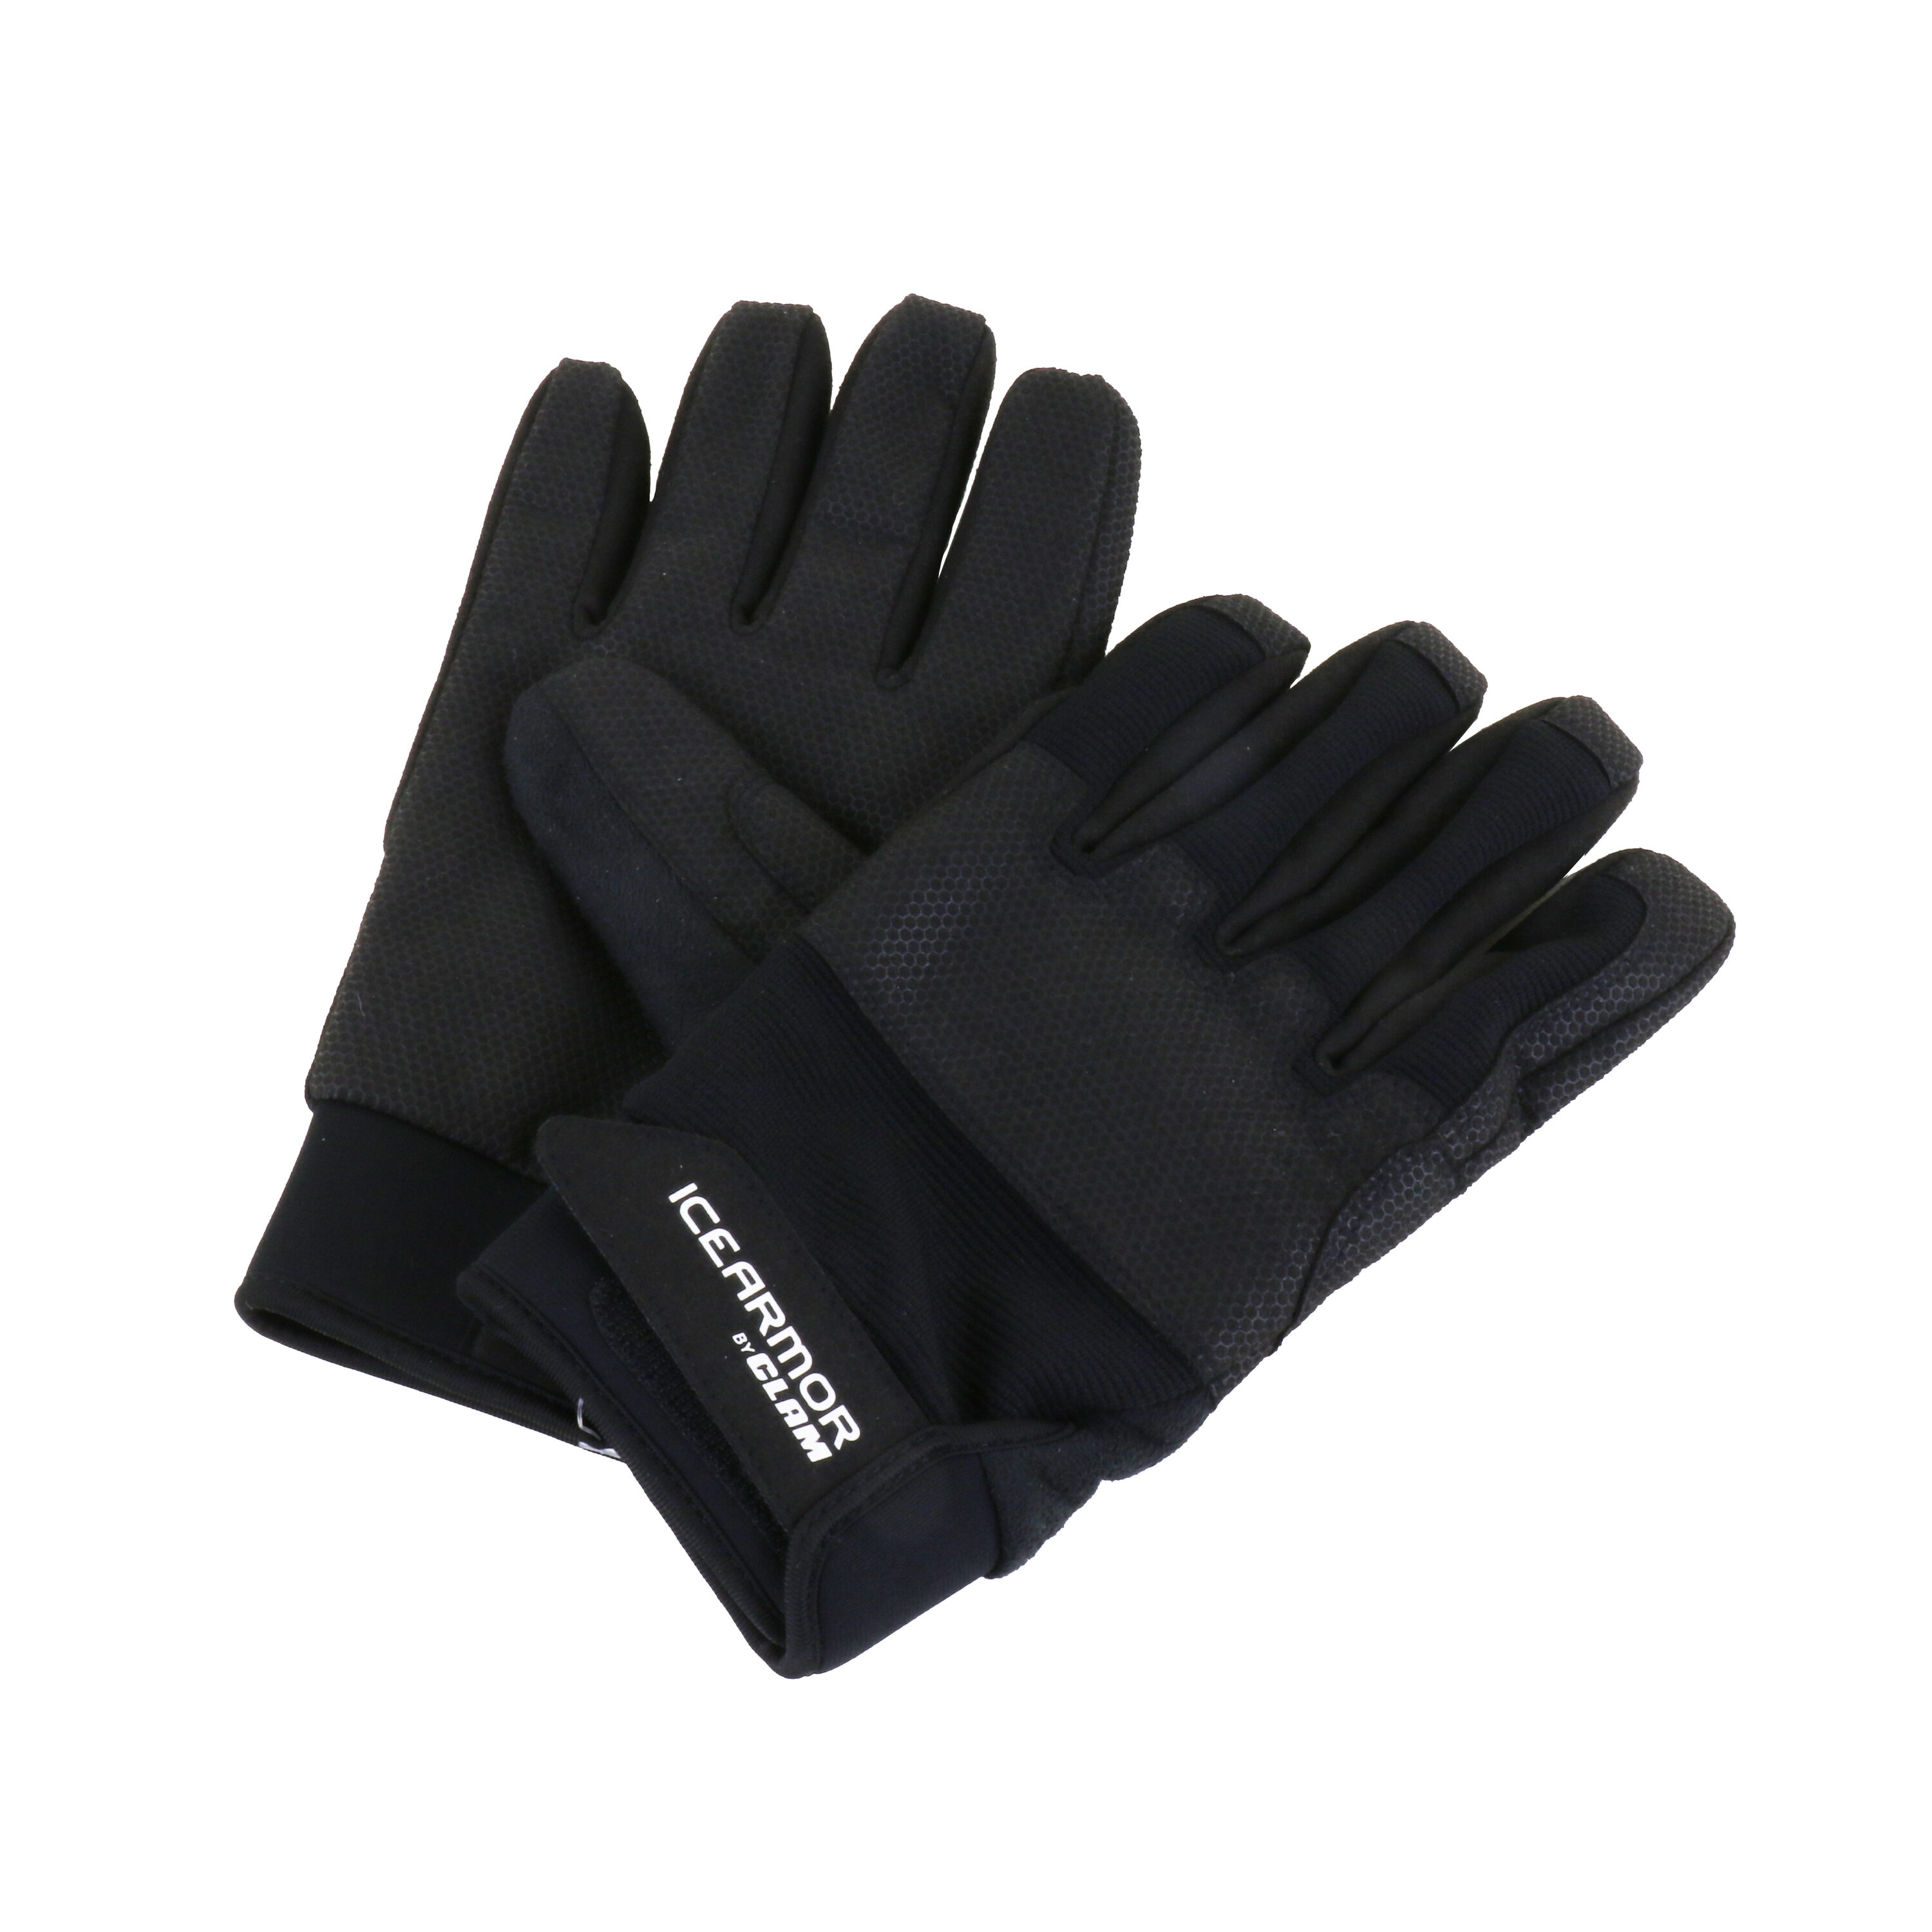 Clam Outdoors Waterproof Tactical Ice Fishing Glove - XL in the